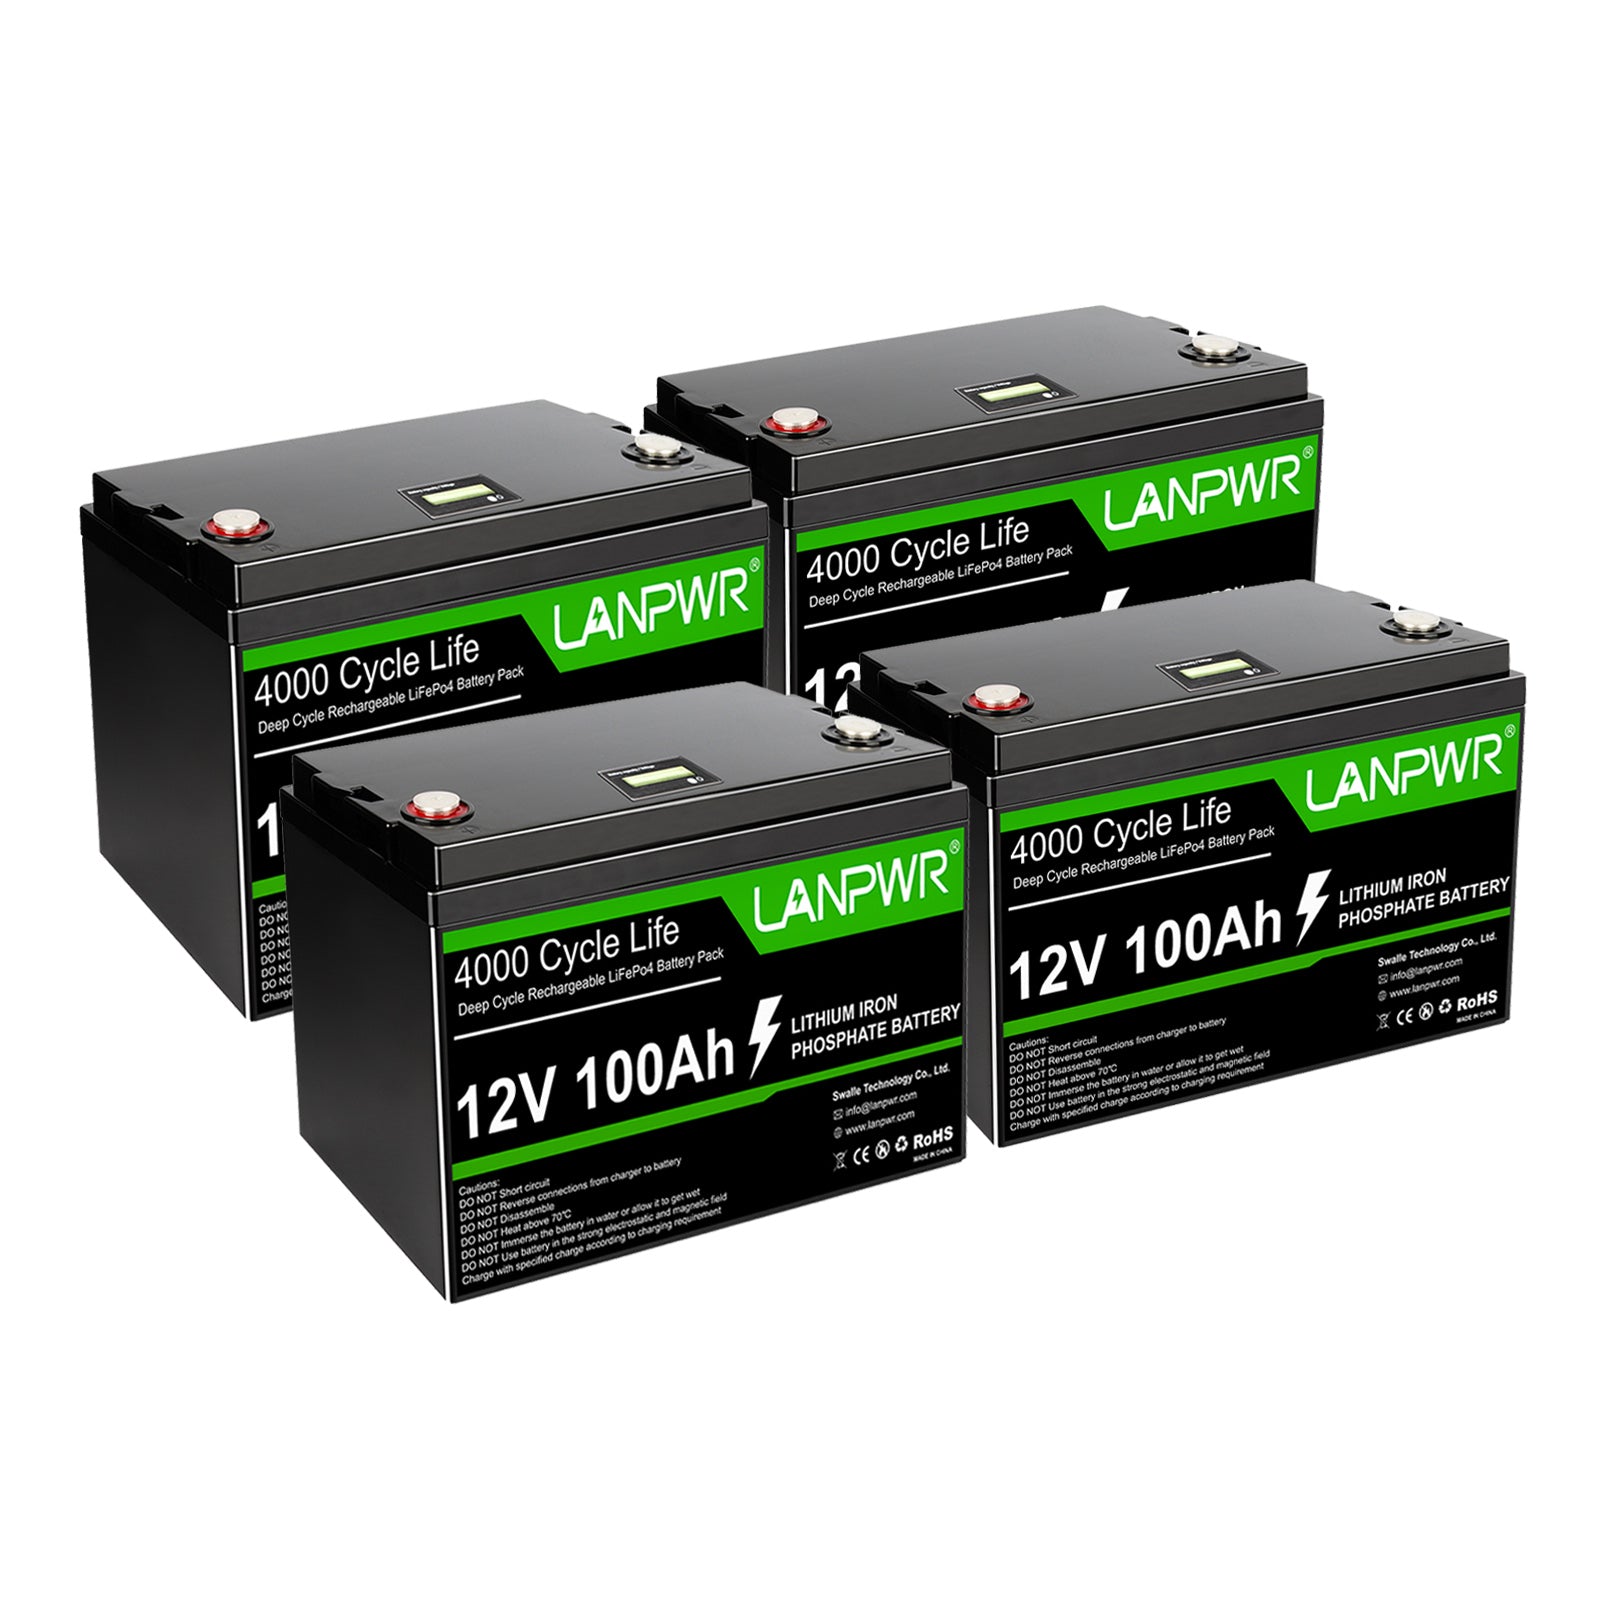 LANPWR 12V 100Ah LiFePO4 Battery, Built-in 100A BMS, 1280Wh Energy